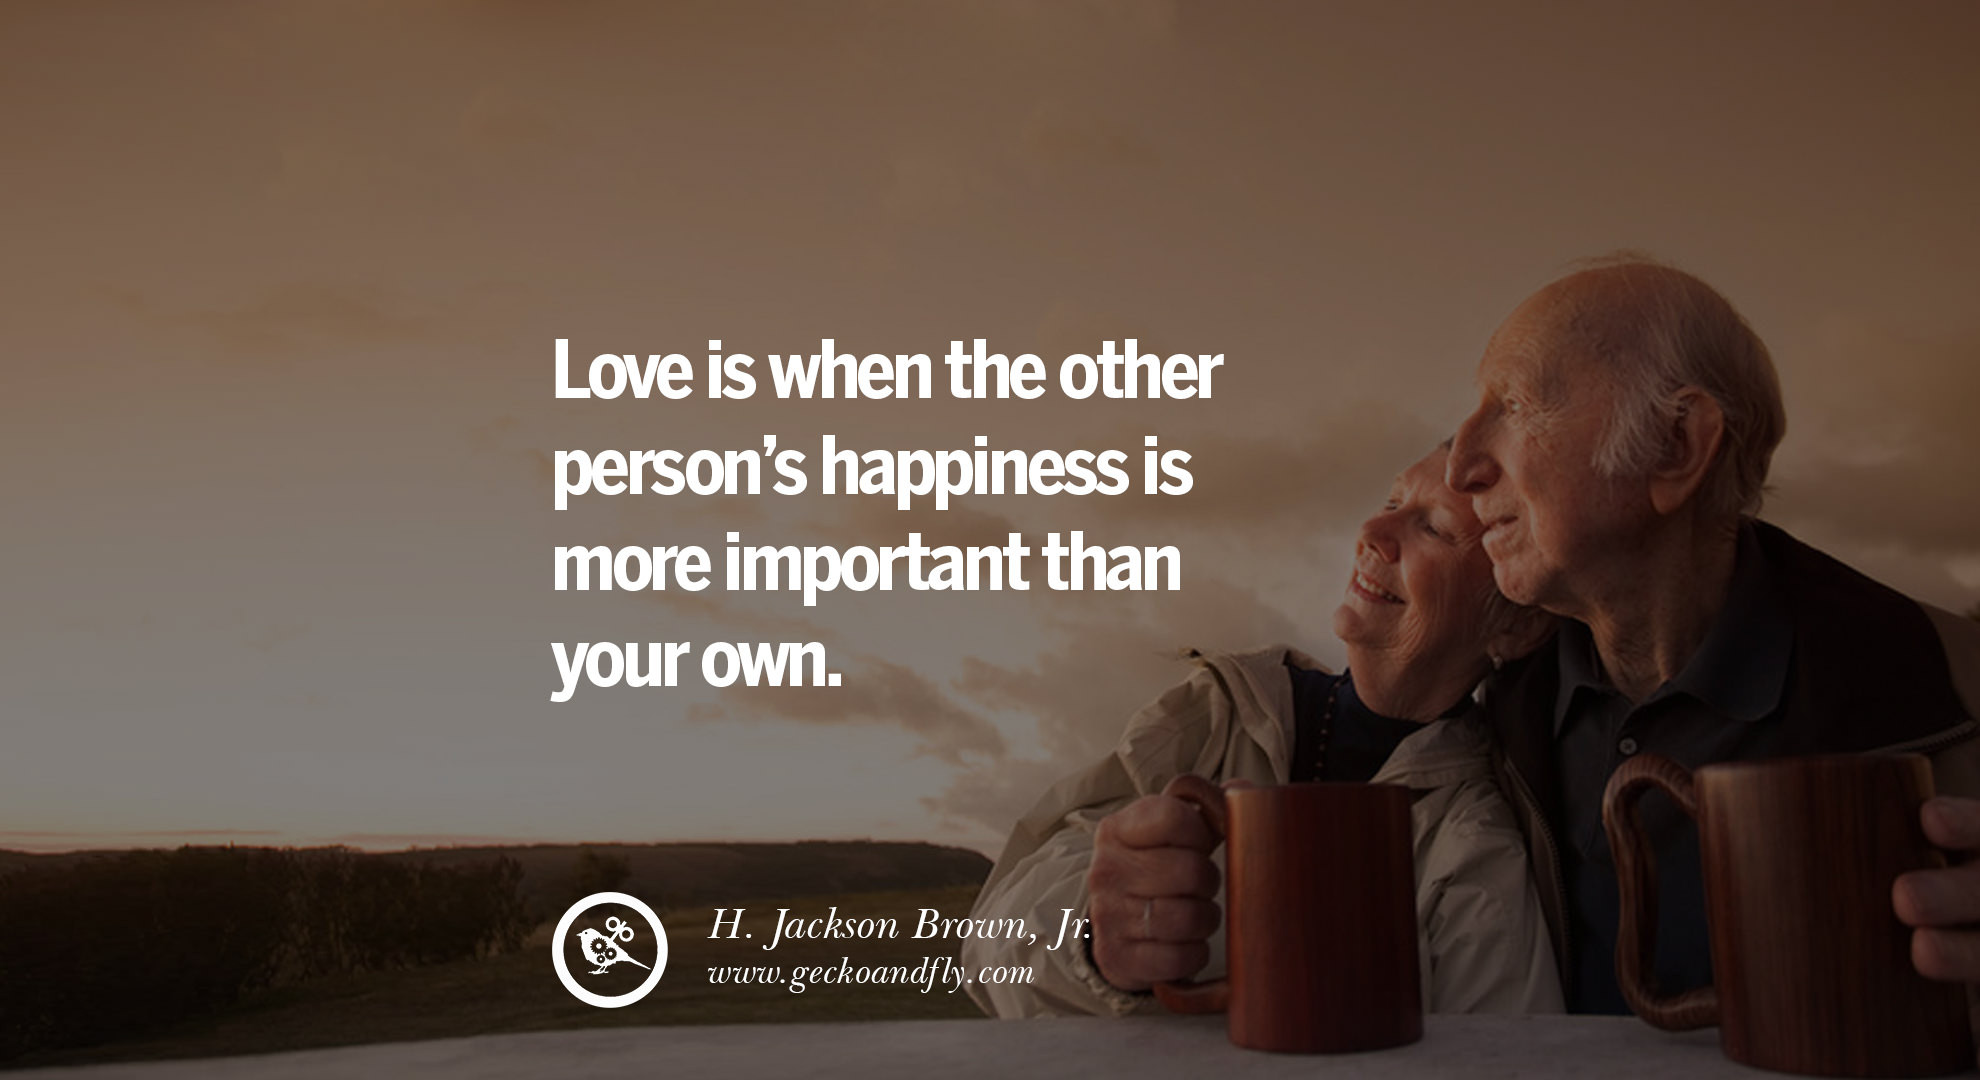 Life And Relationships Quotes
 40 Romantic Quotes about Love Life Marriage and Relationships